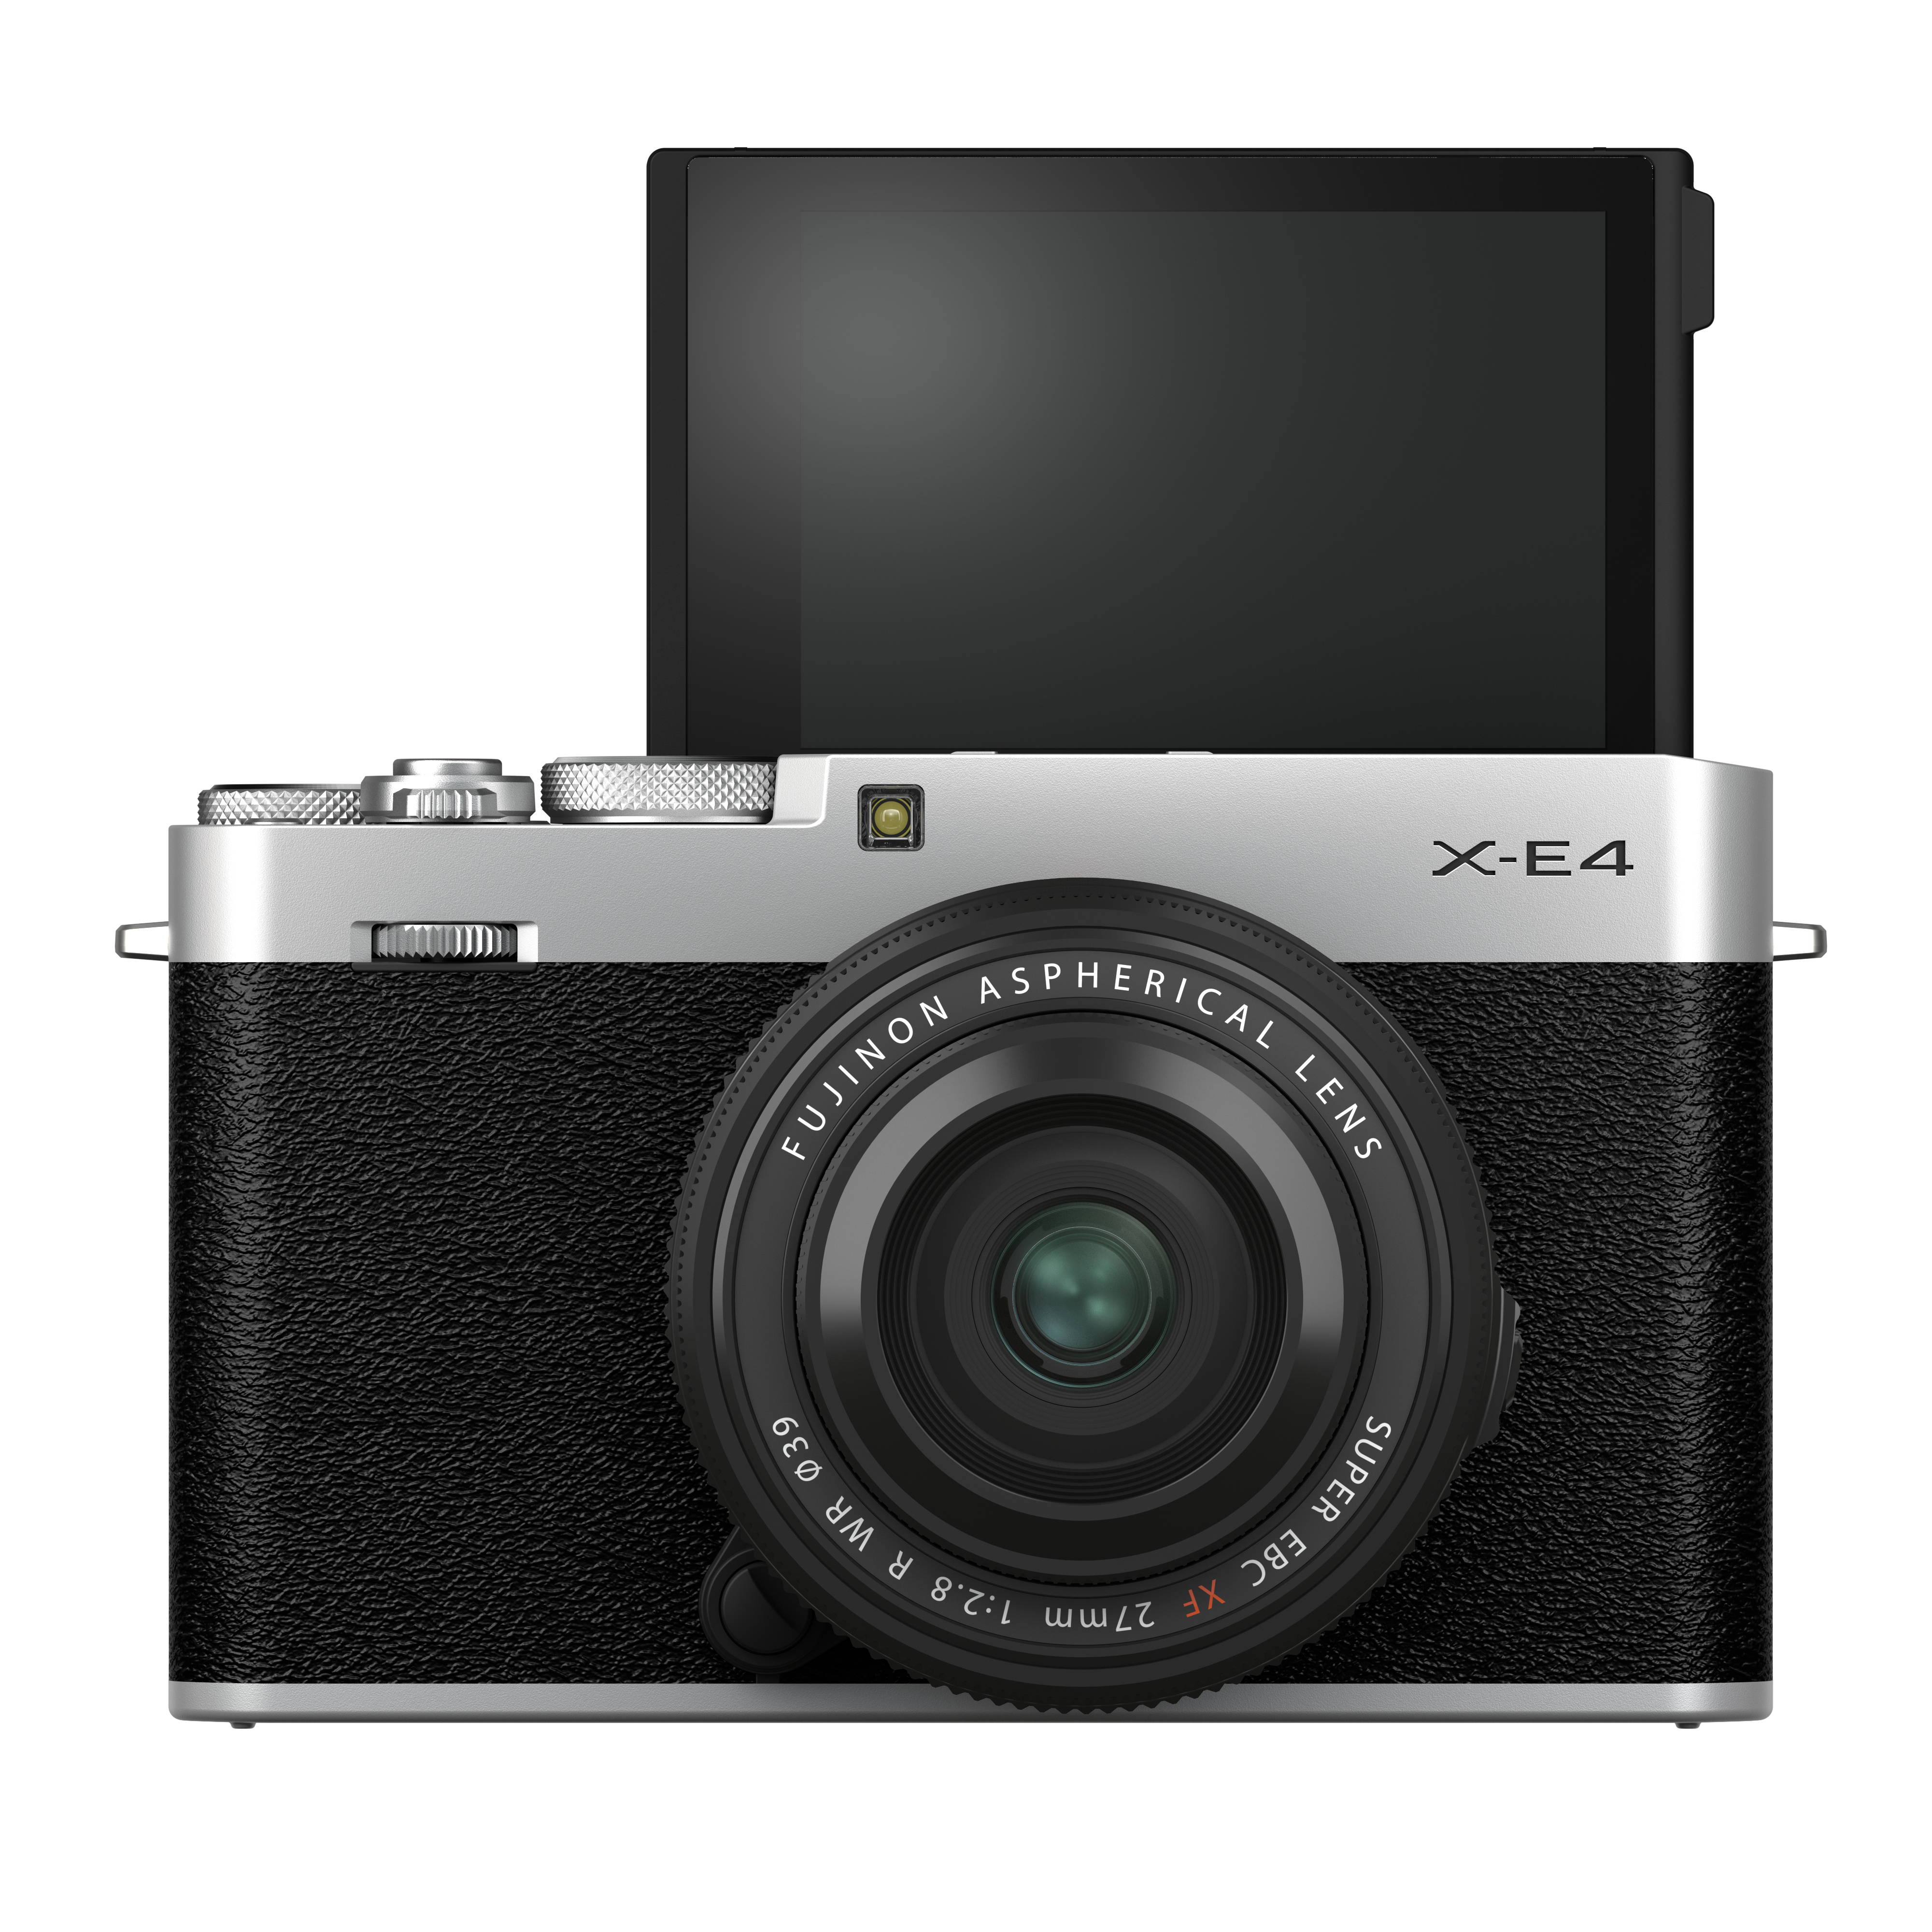 Meet The New Compact Camera Combo from Fujifilm!